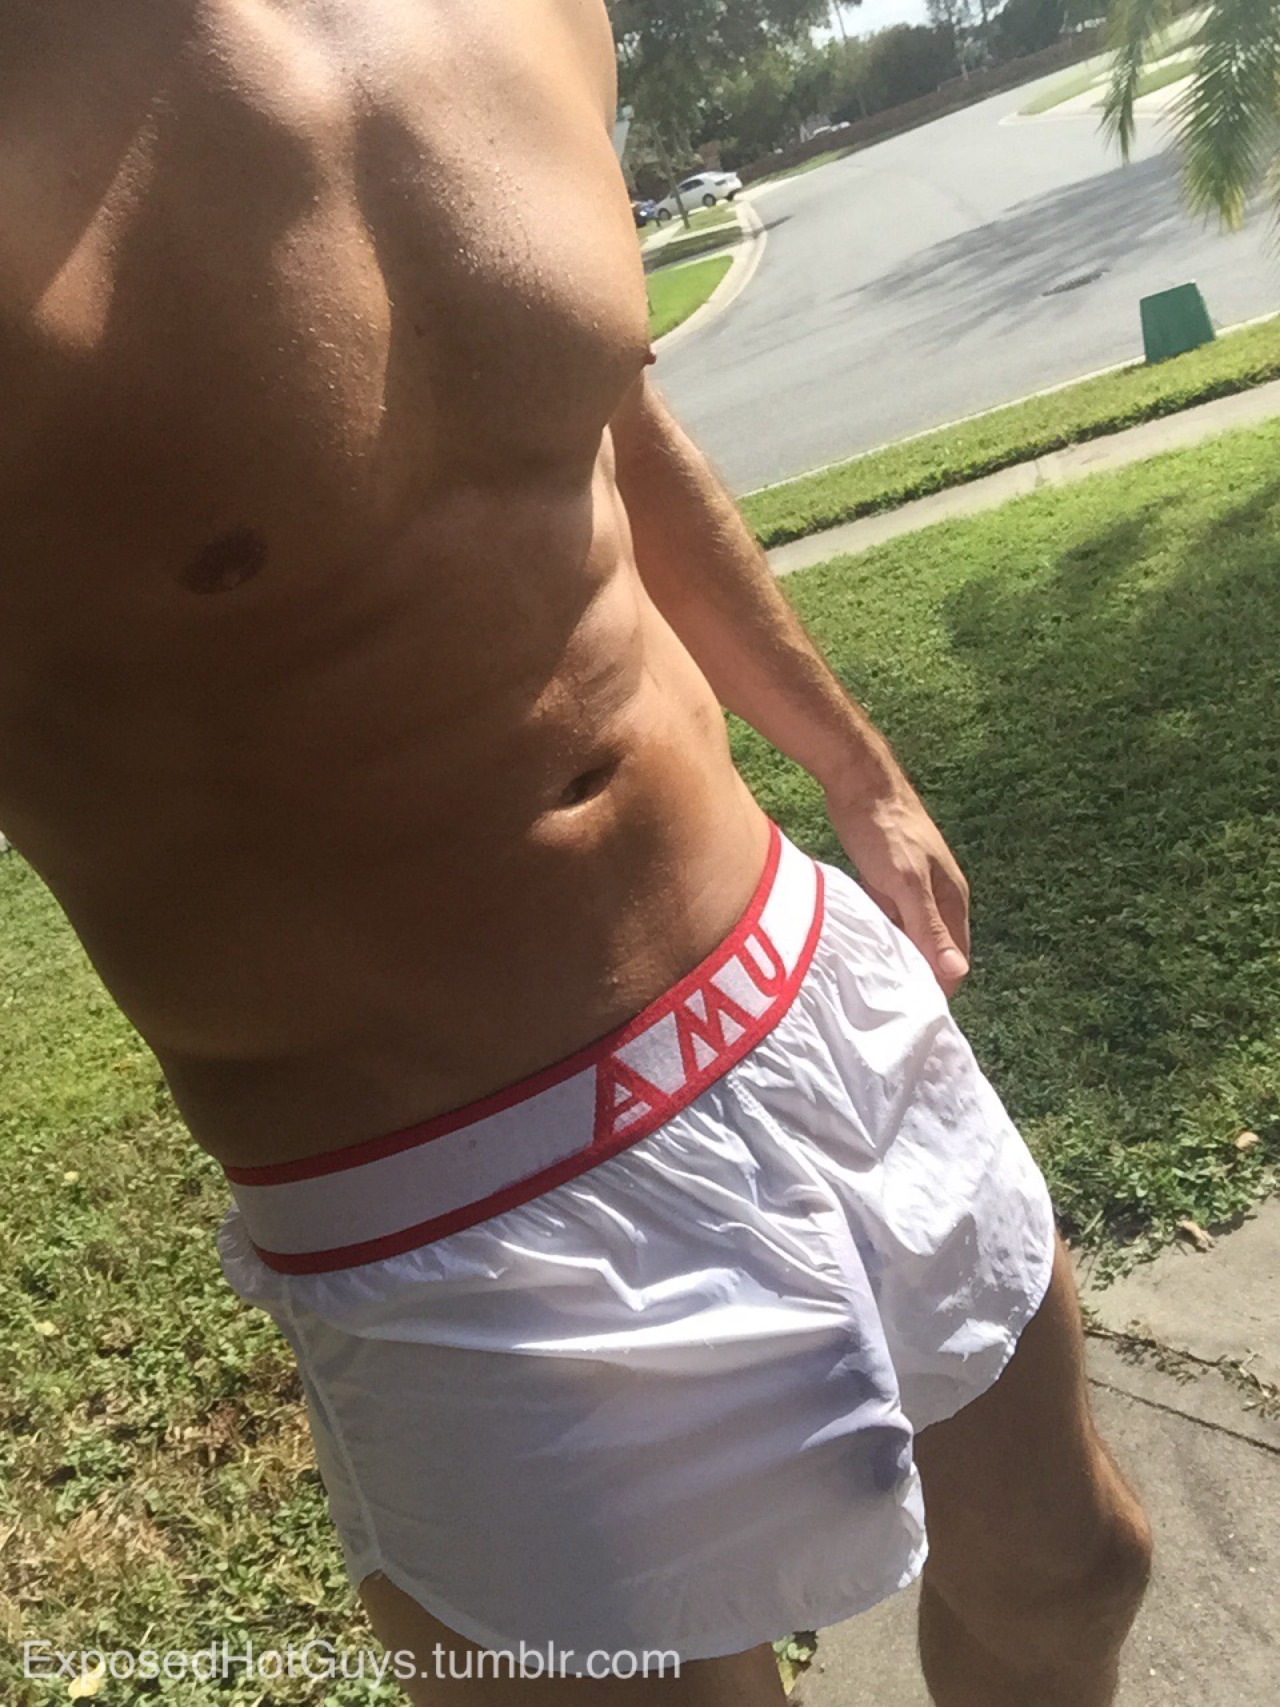 exposedhotguys:  My friends at AlphaMaleUndies.com sent me a pair of their nylon